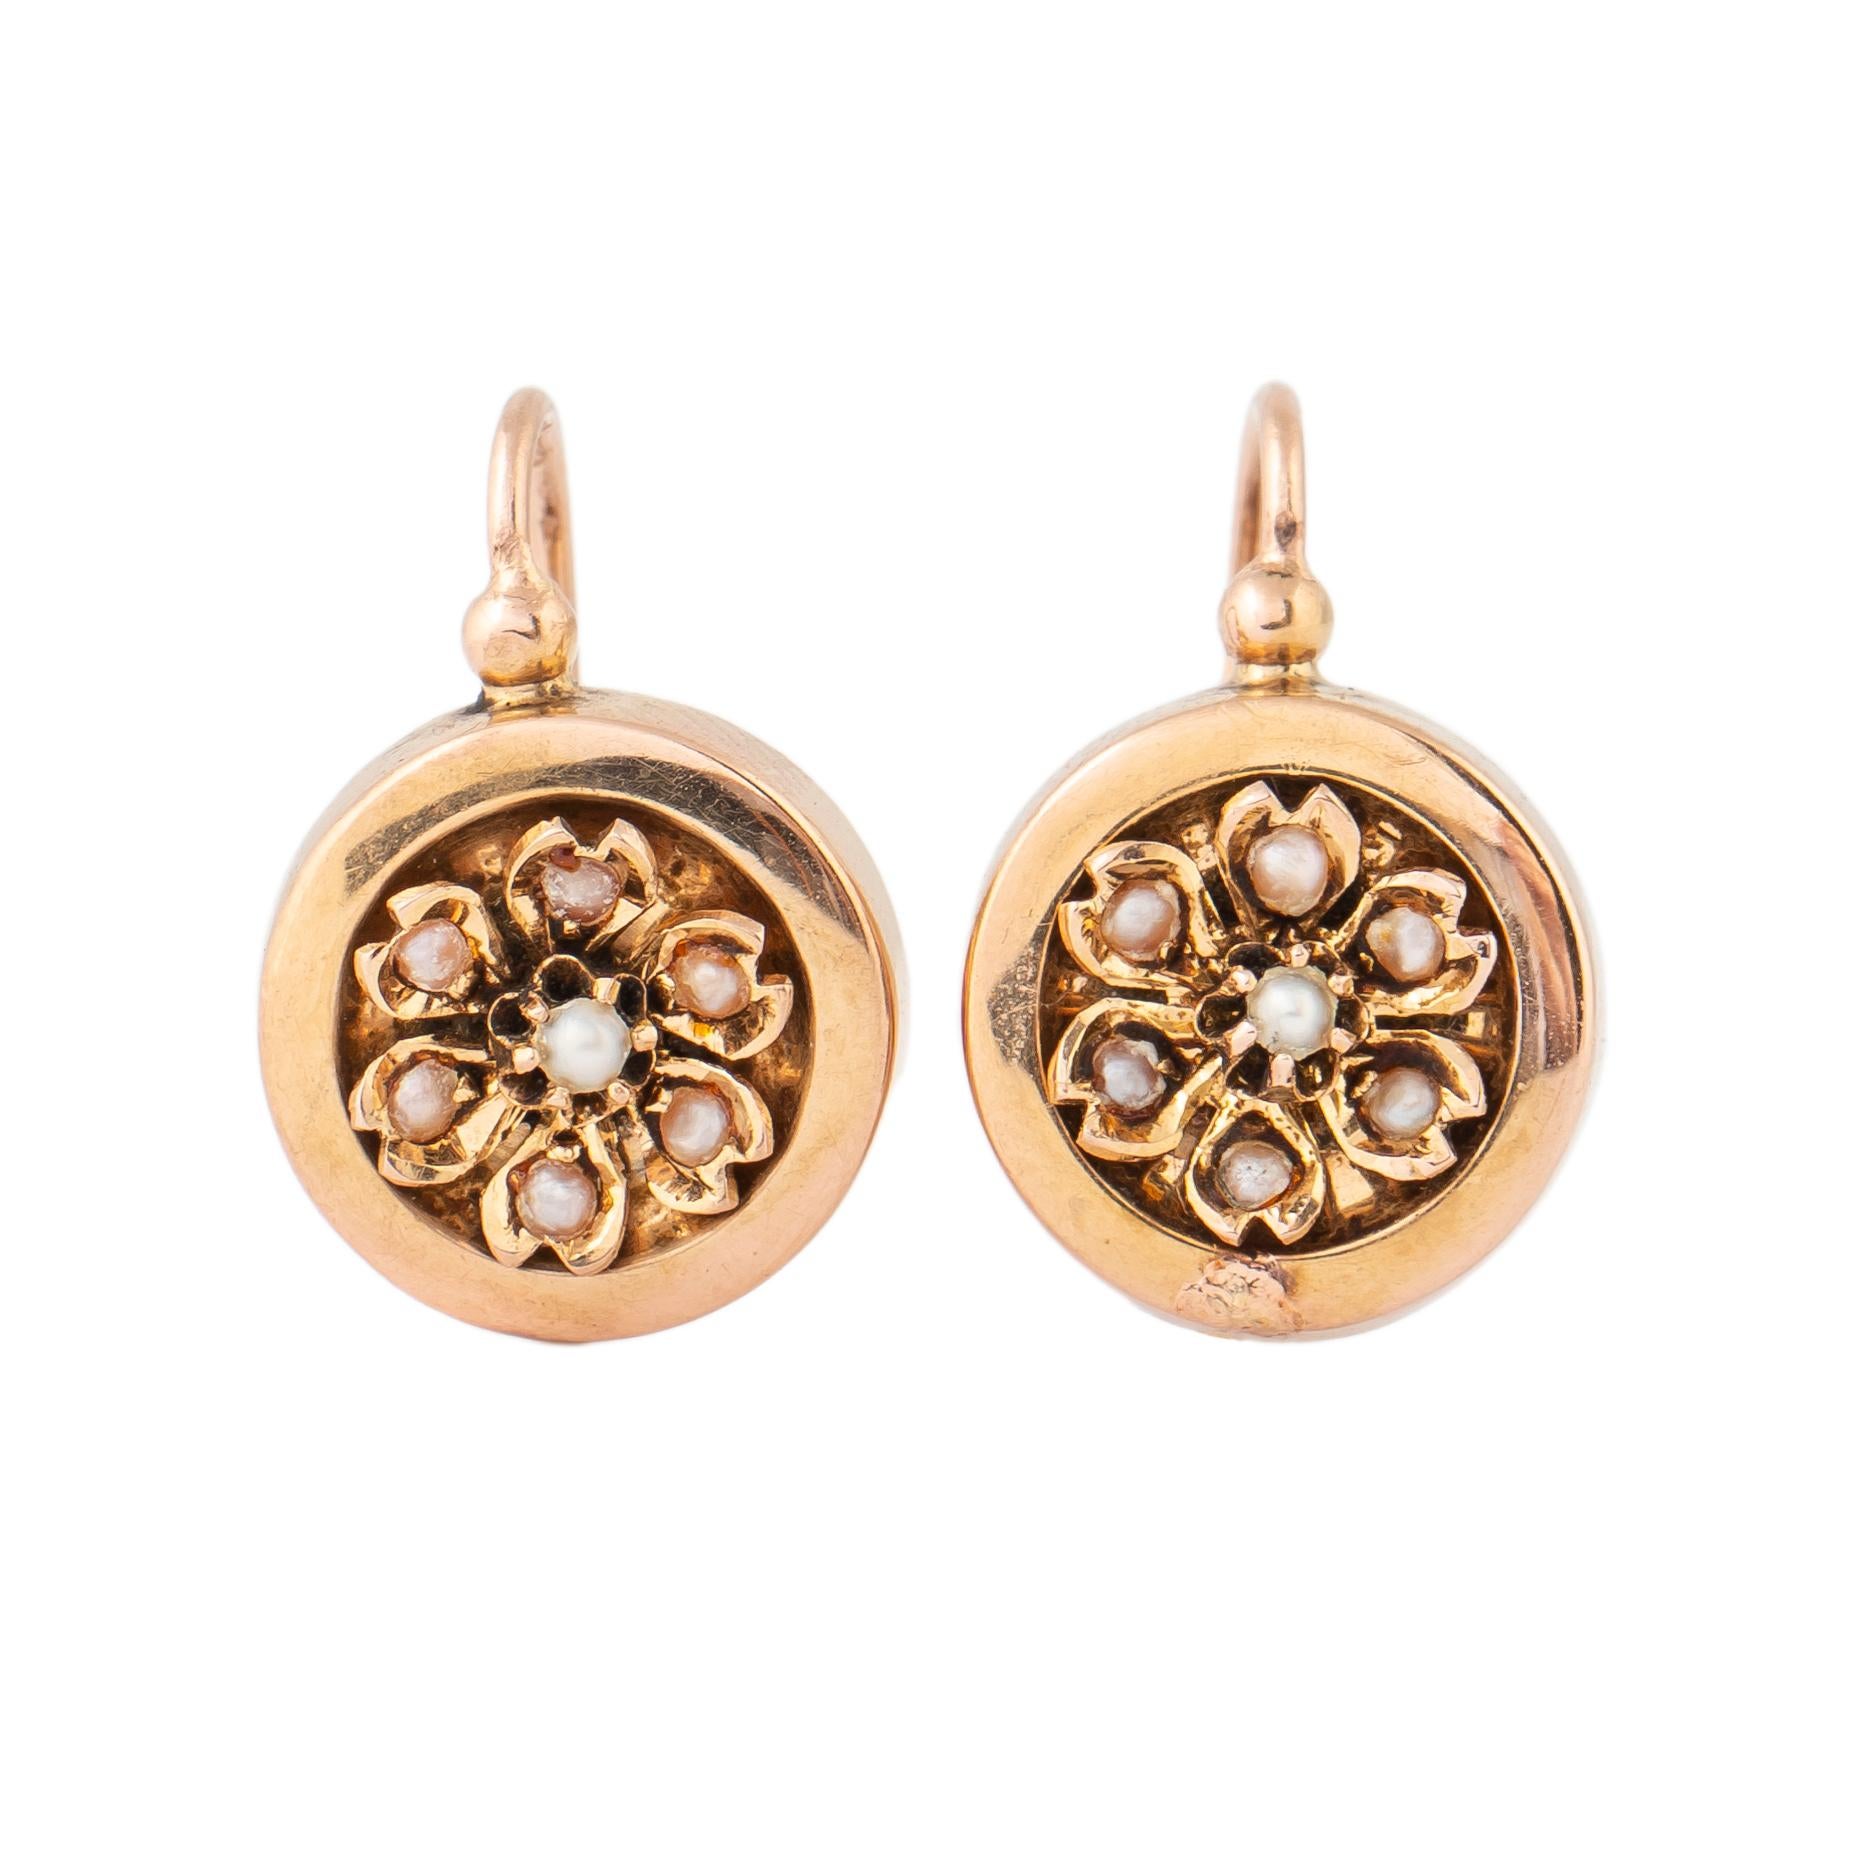 This beautiful pair of French 18k rose gold earrings from the 19th century enhanced with a cluster of seed pearl flowers and attached to gold wires for pierced ears. 

France, 19th century, hallmarked.

Earring 3/4 in. (1.9 cm); size of drop: 1/2